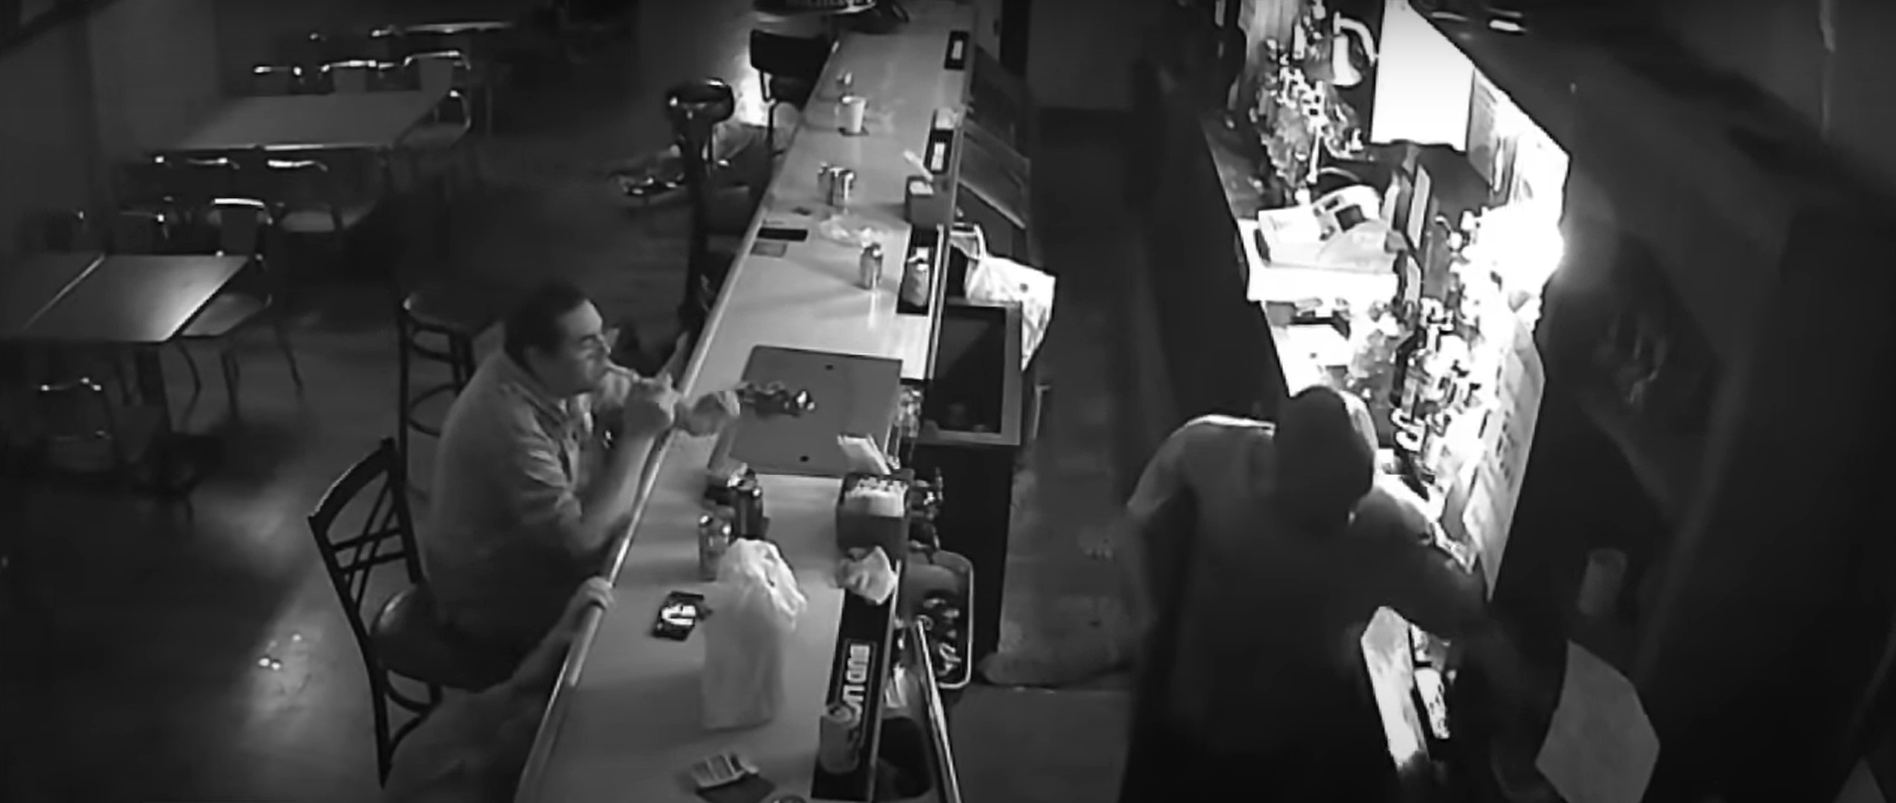 Tony Tovar calmy lighting up a cigarette while a gunman robs Behrmann's Tavern in St. Louis on a follow-up post uploaded on April 4, 2021 | Source: YouTube/Inside Edition